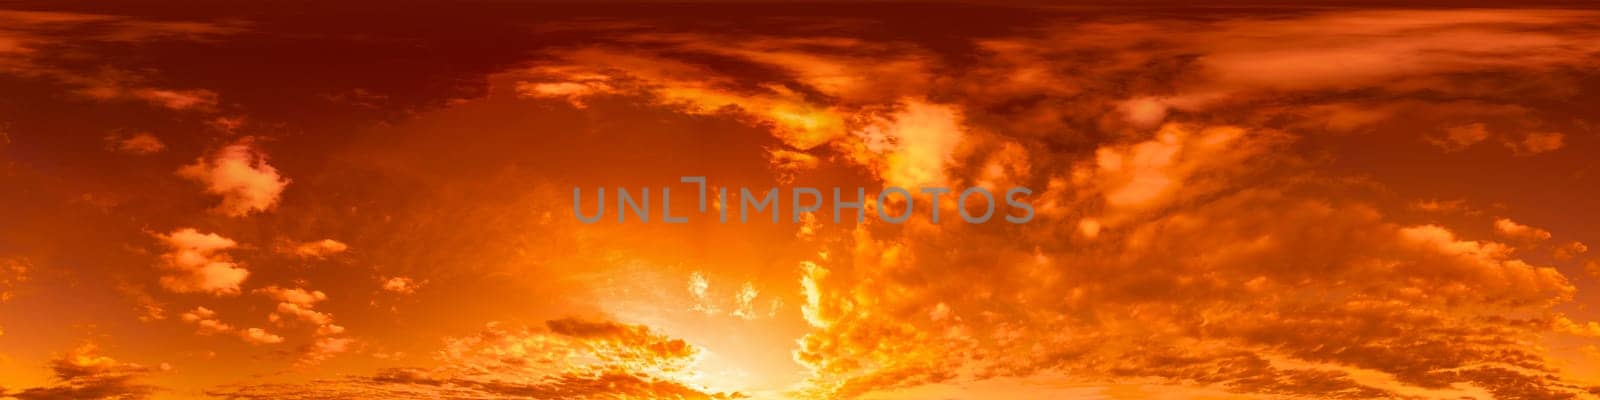 Golden glowing red orange overcast sunset sky 360 hdr panorama. Seamless spherical equirectangular panorama. Sky dome or zenith for 3D visualization and sky replacement for aerial drone 360 panoramas. by Matiunina